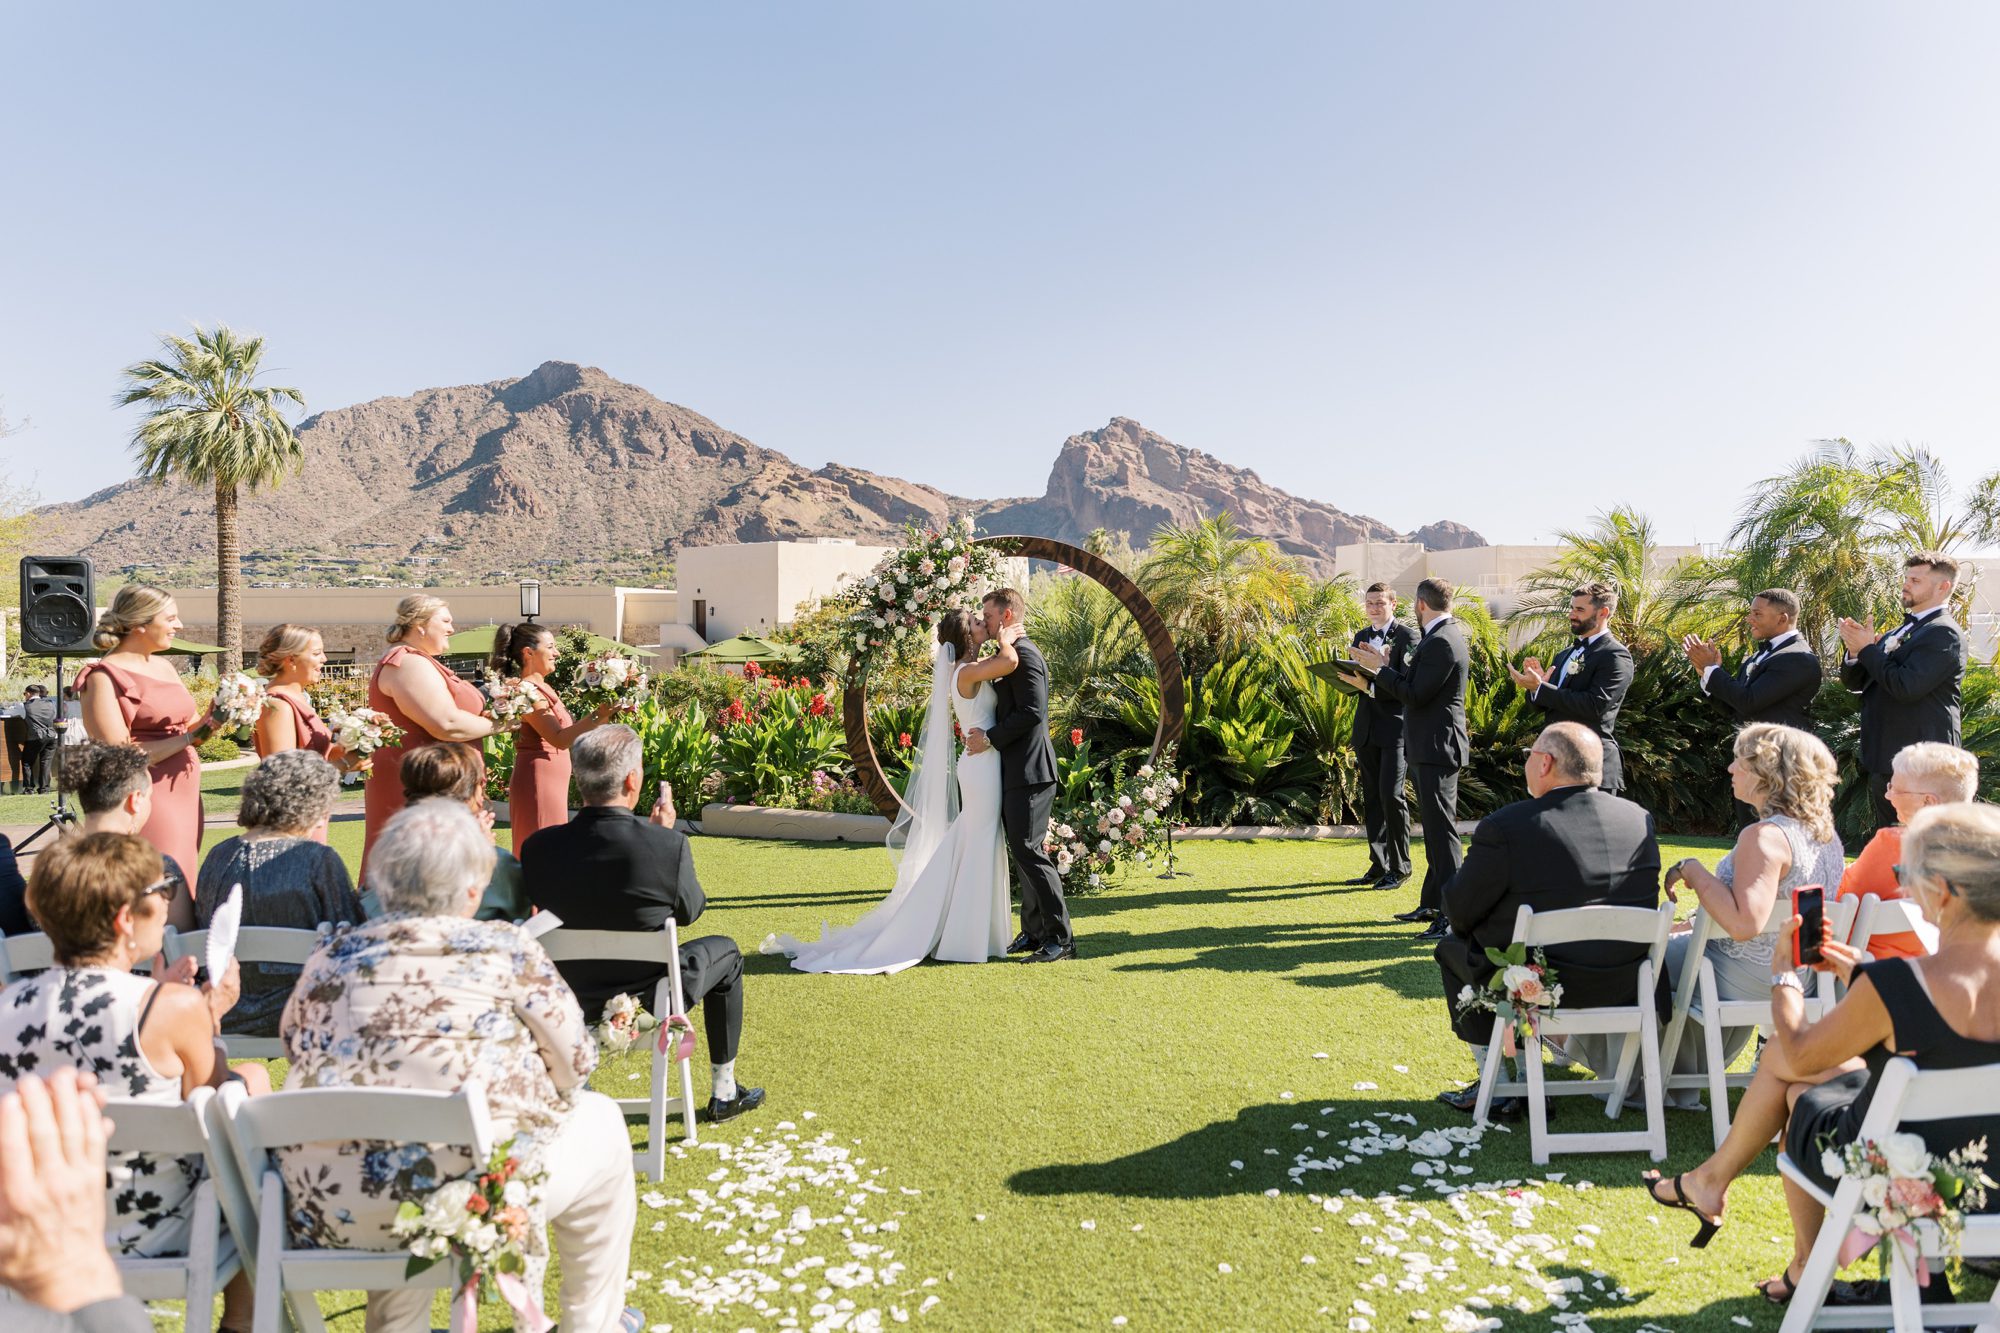 The outdoor wedding ceremony at the Camelback Inn in Scottsdale wedding